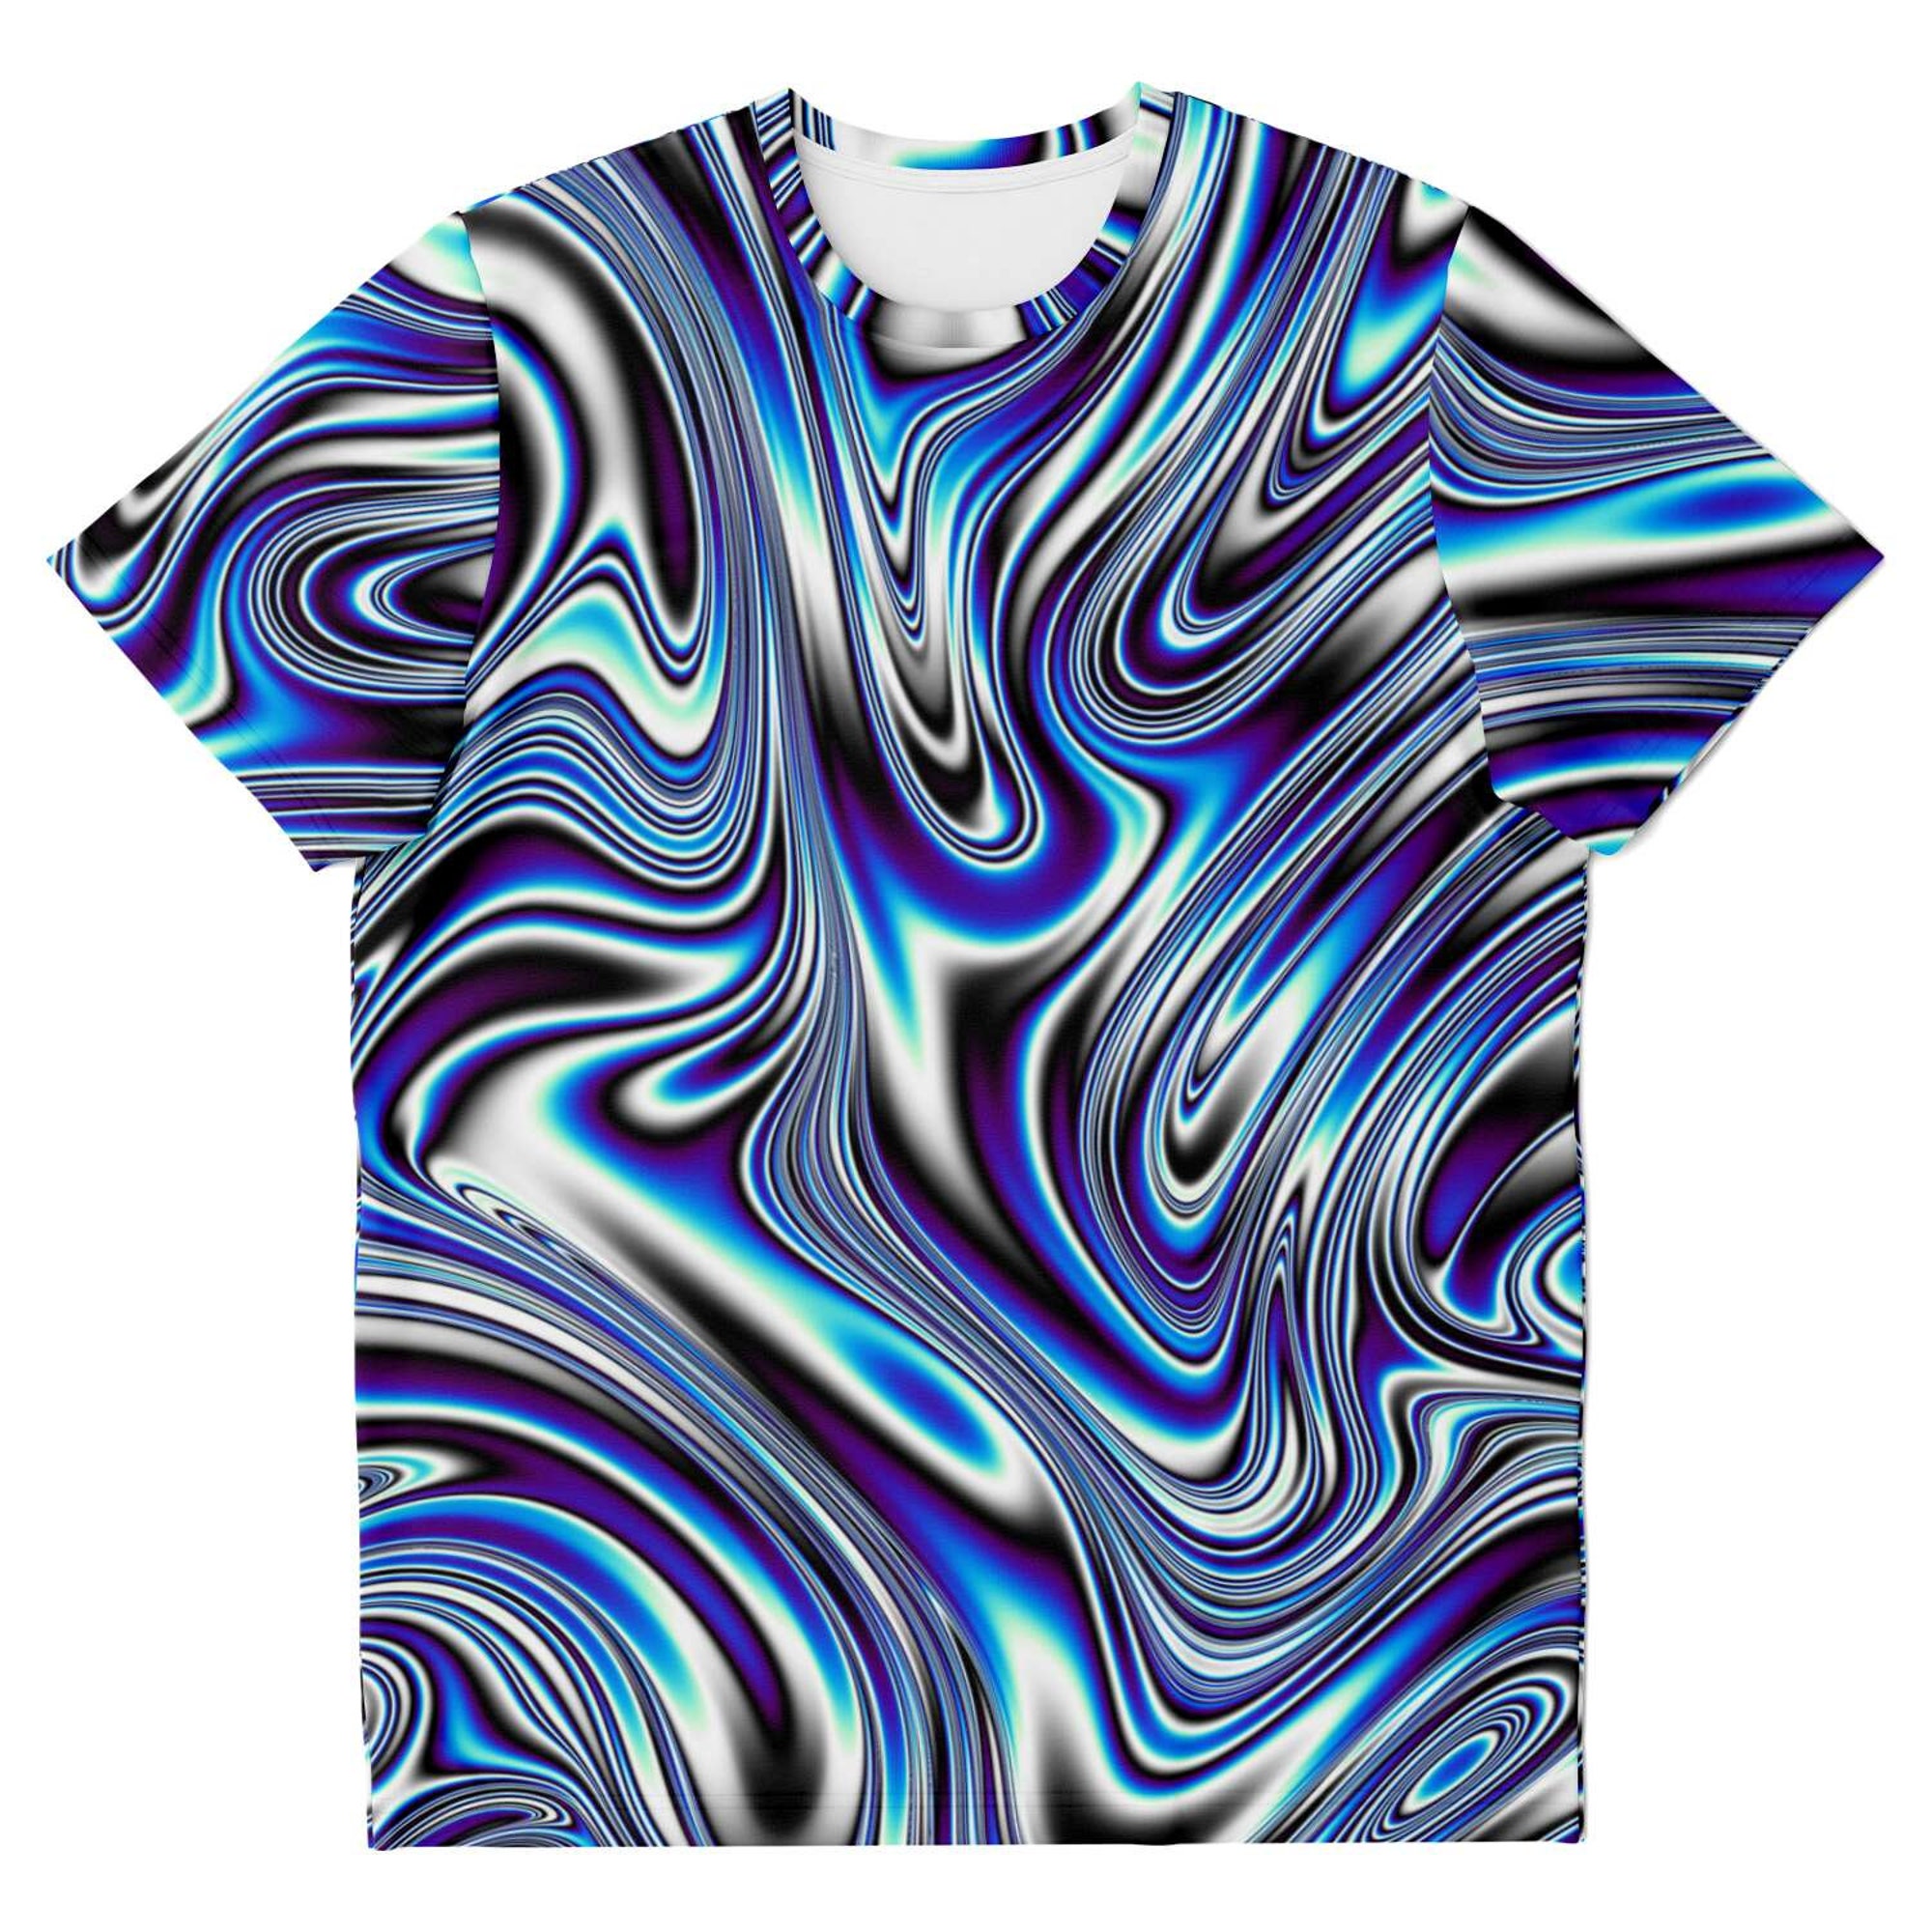 Discover Blue Liquid Waves Swirls Psychedelic Illusion Paint Effect 3D T Shirt